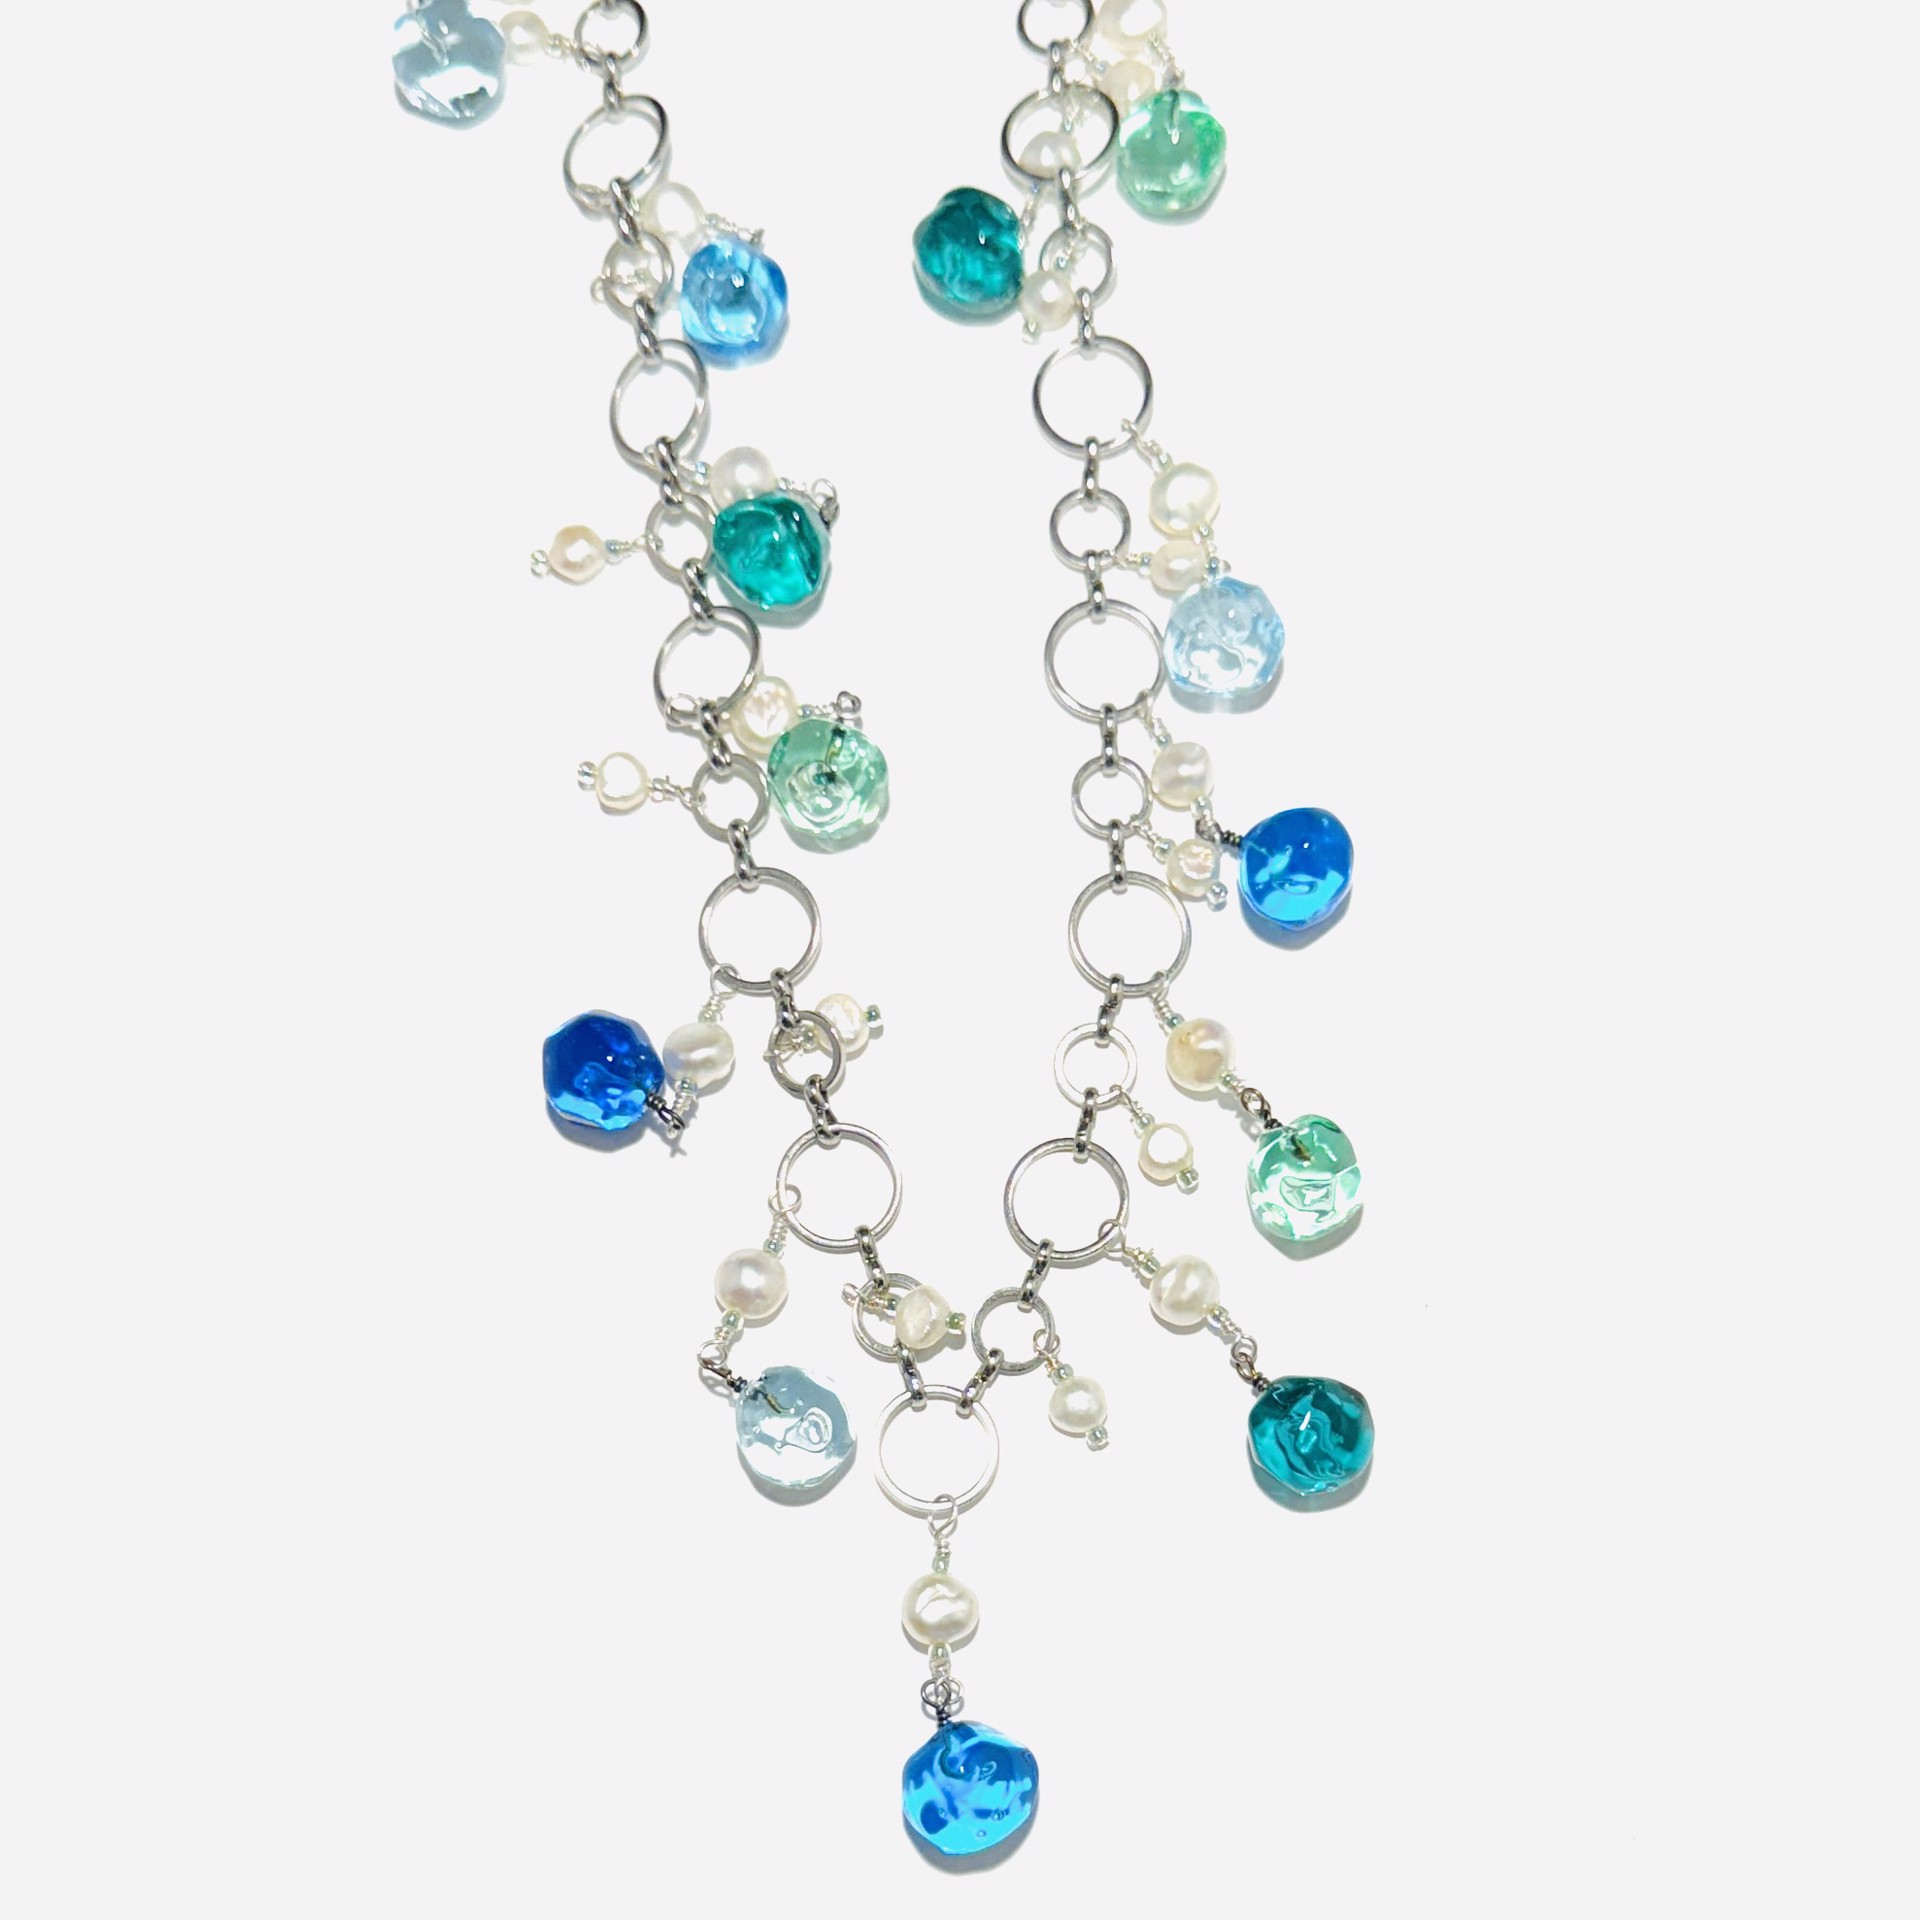 “Sea Glass” Drop Beads with Pearls, Metal Hoop Necklace LS24-63 by Linda Sacra